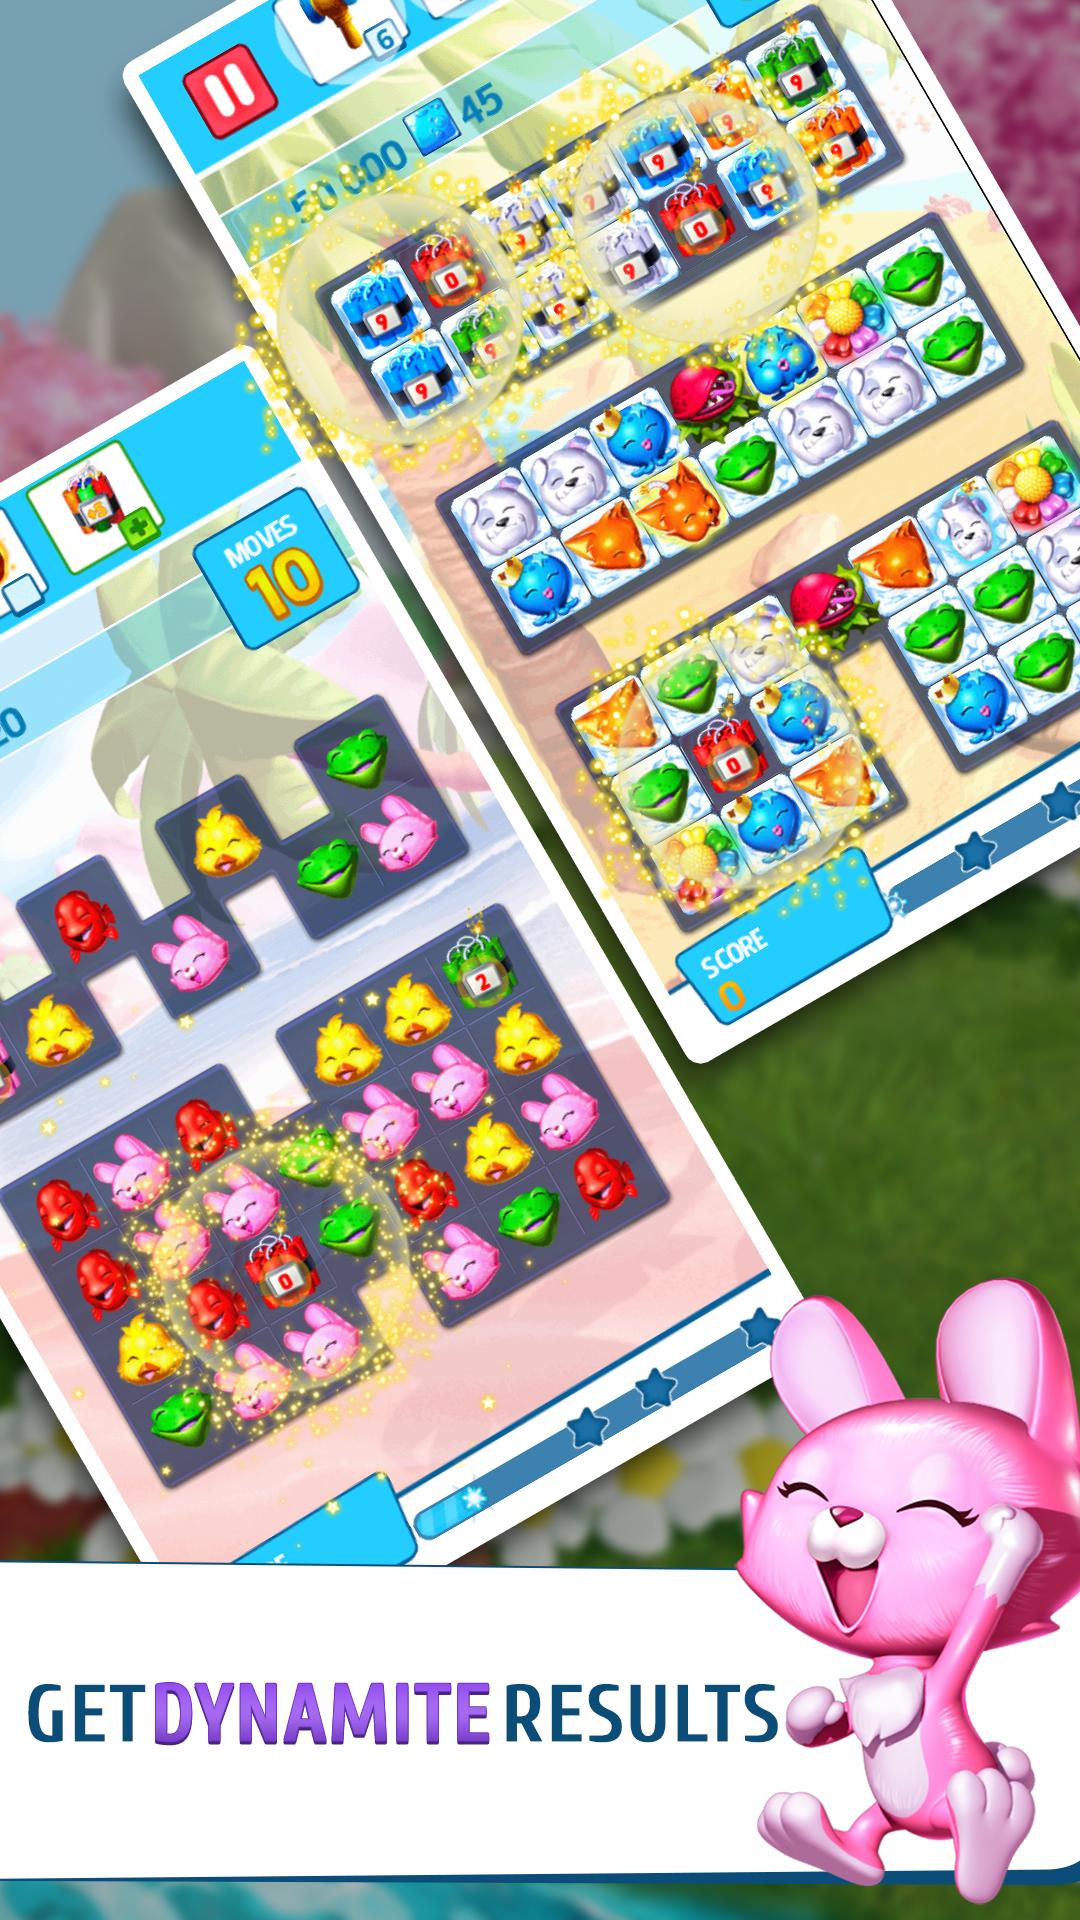 Puzzle Pets for Android - APK Download